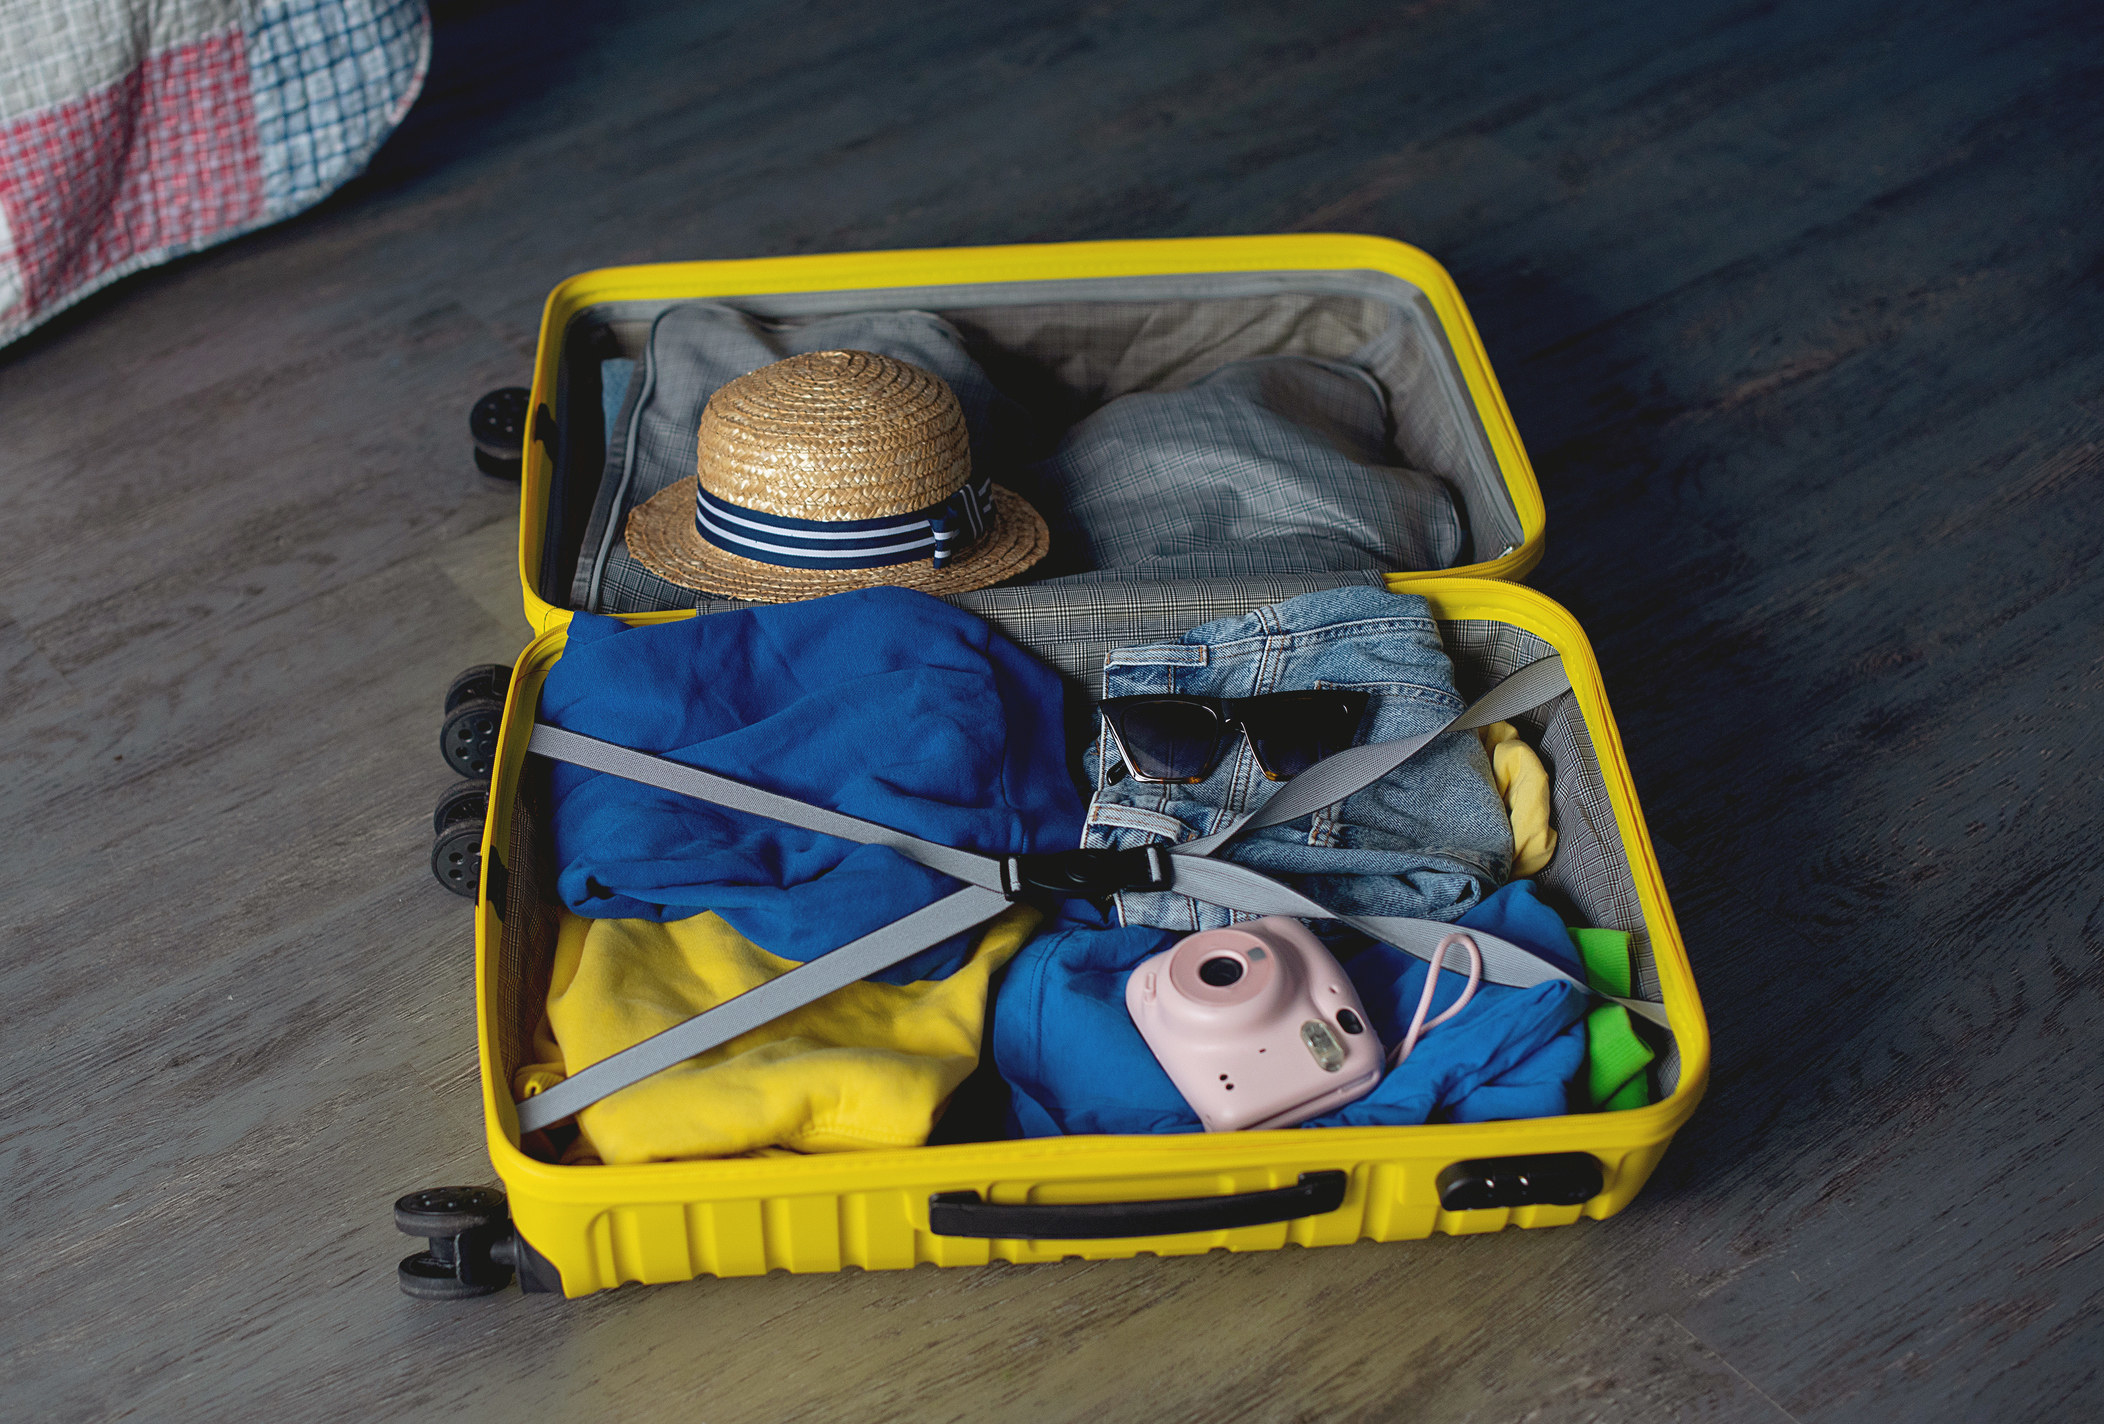 An opened suitcase with items in it